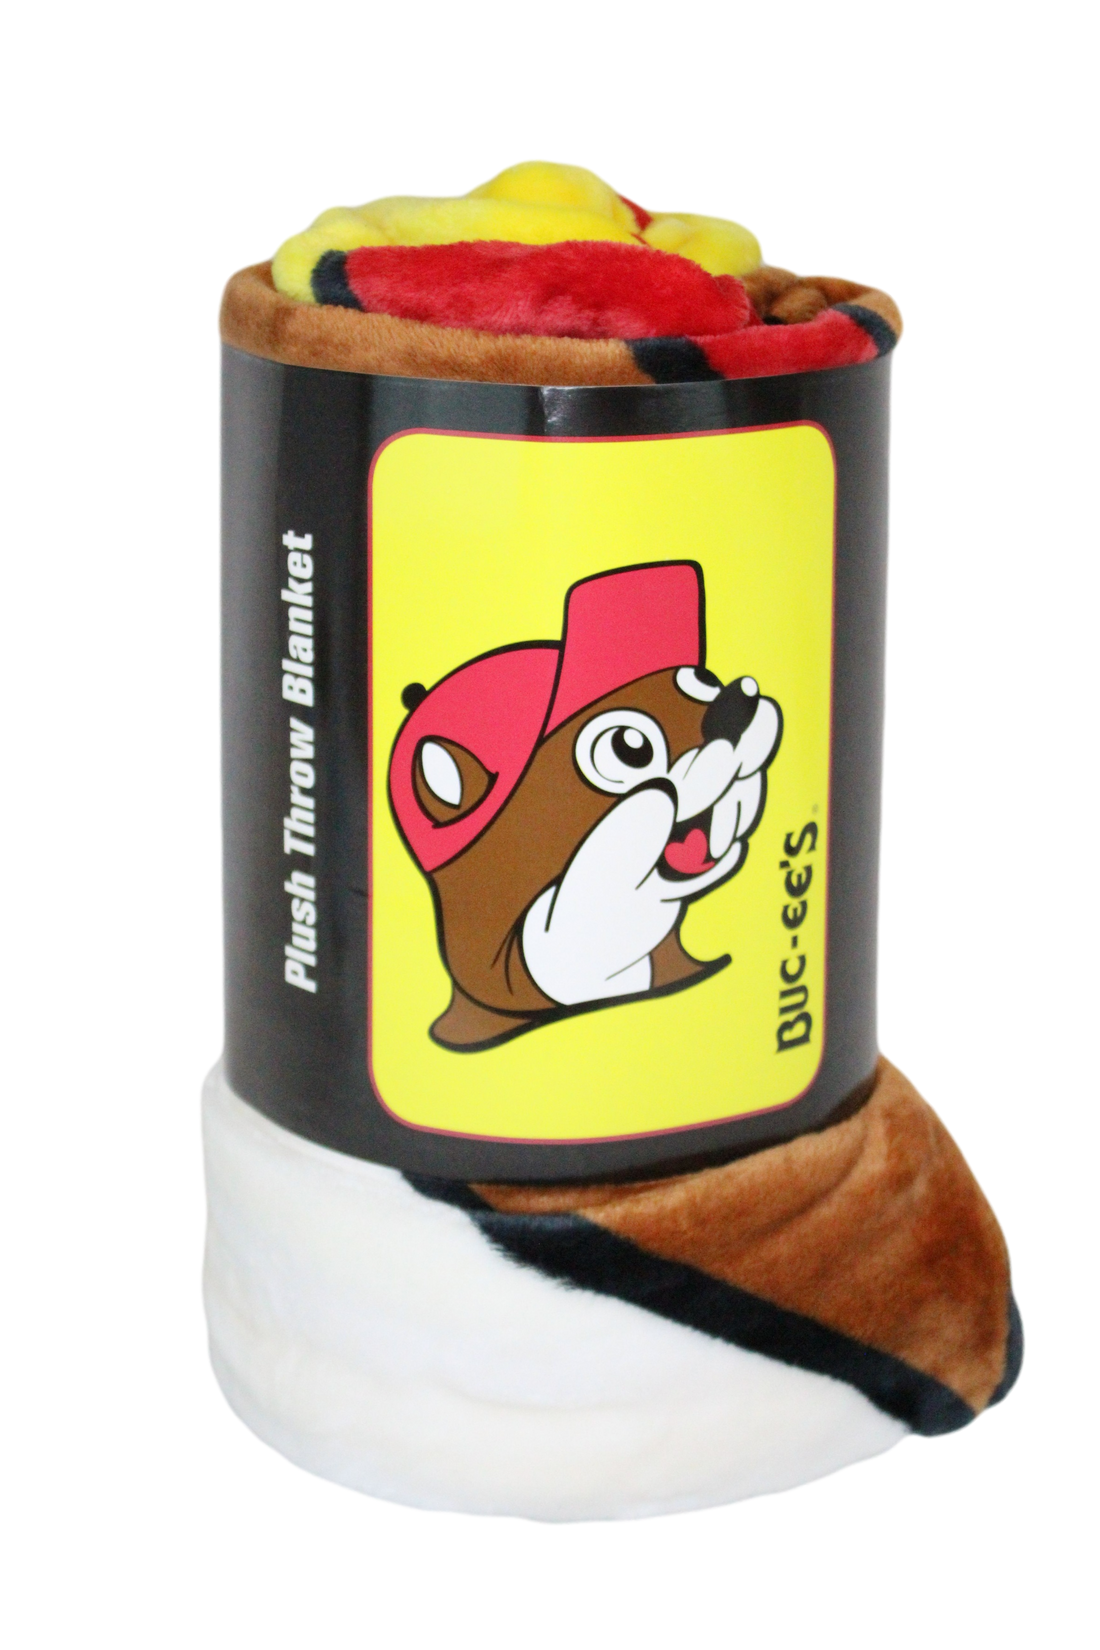 Need a Buc-ee's blanket?  We've got y'all covered!